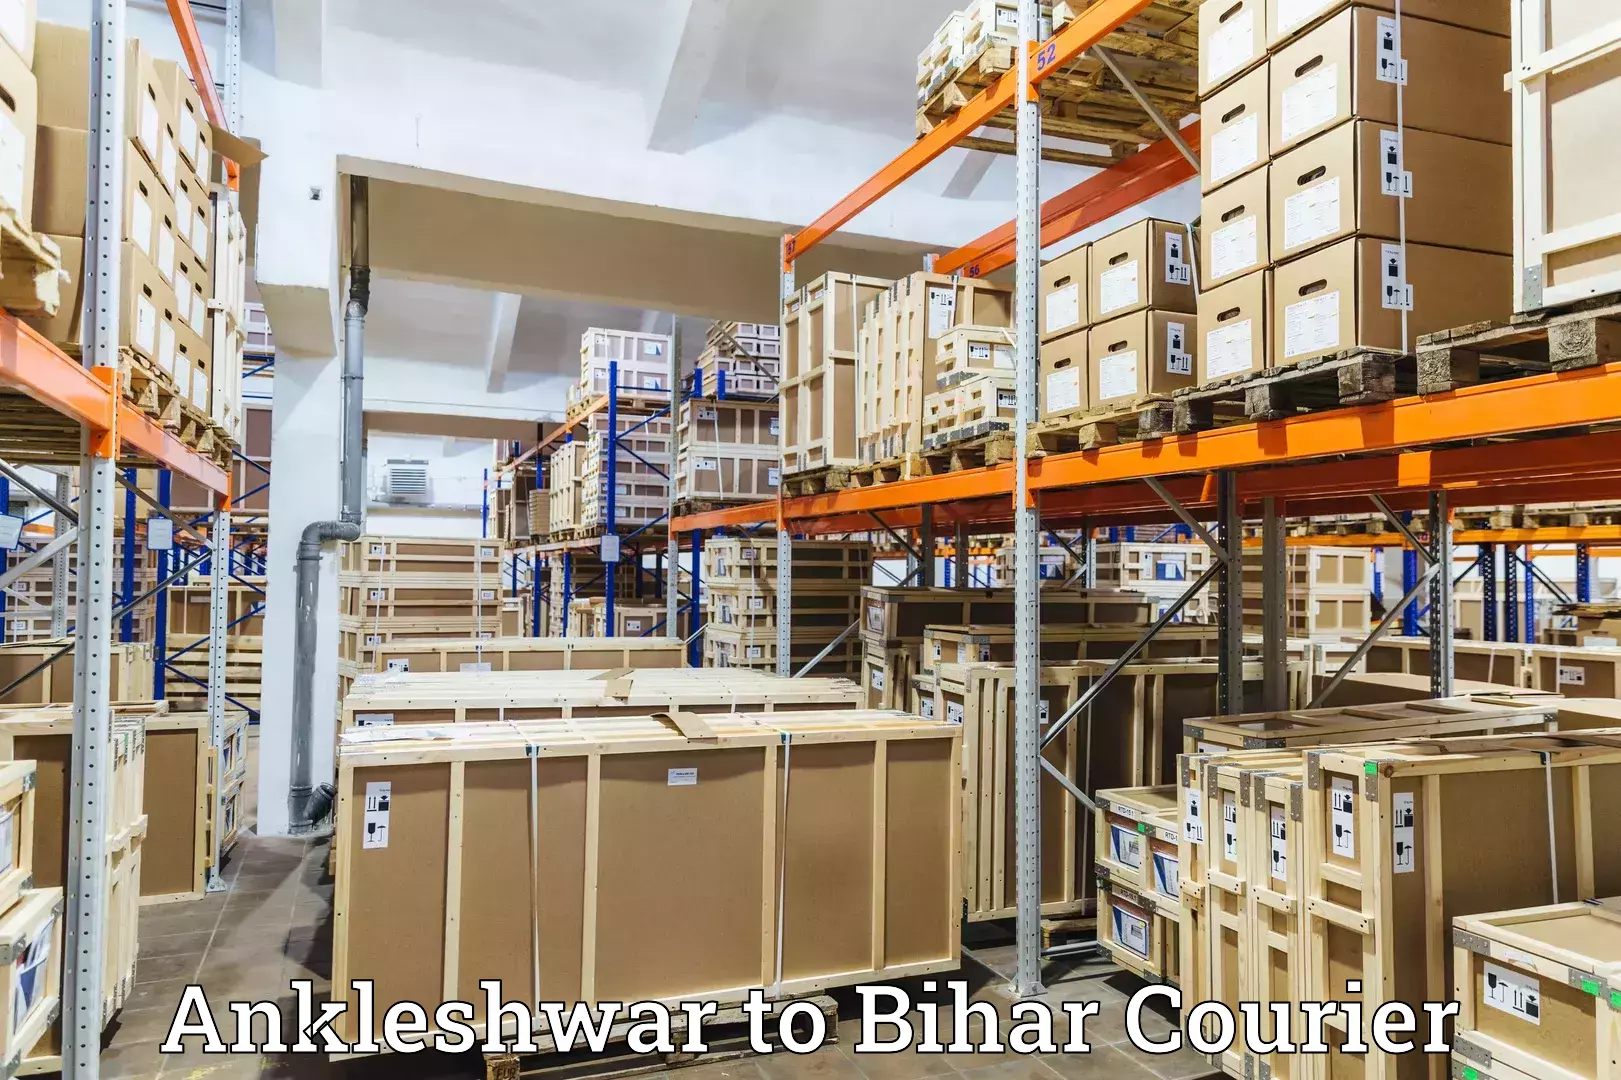 Express delivery network in Ankleshwar to Bihar